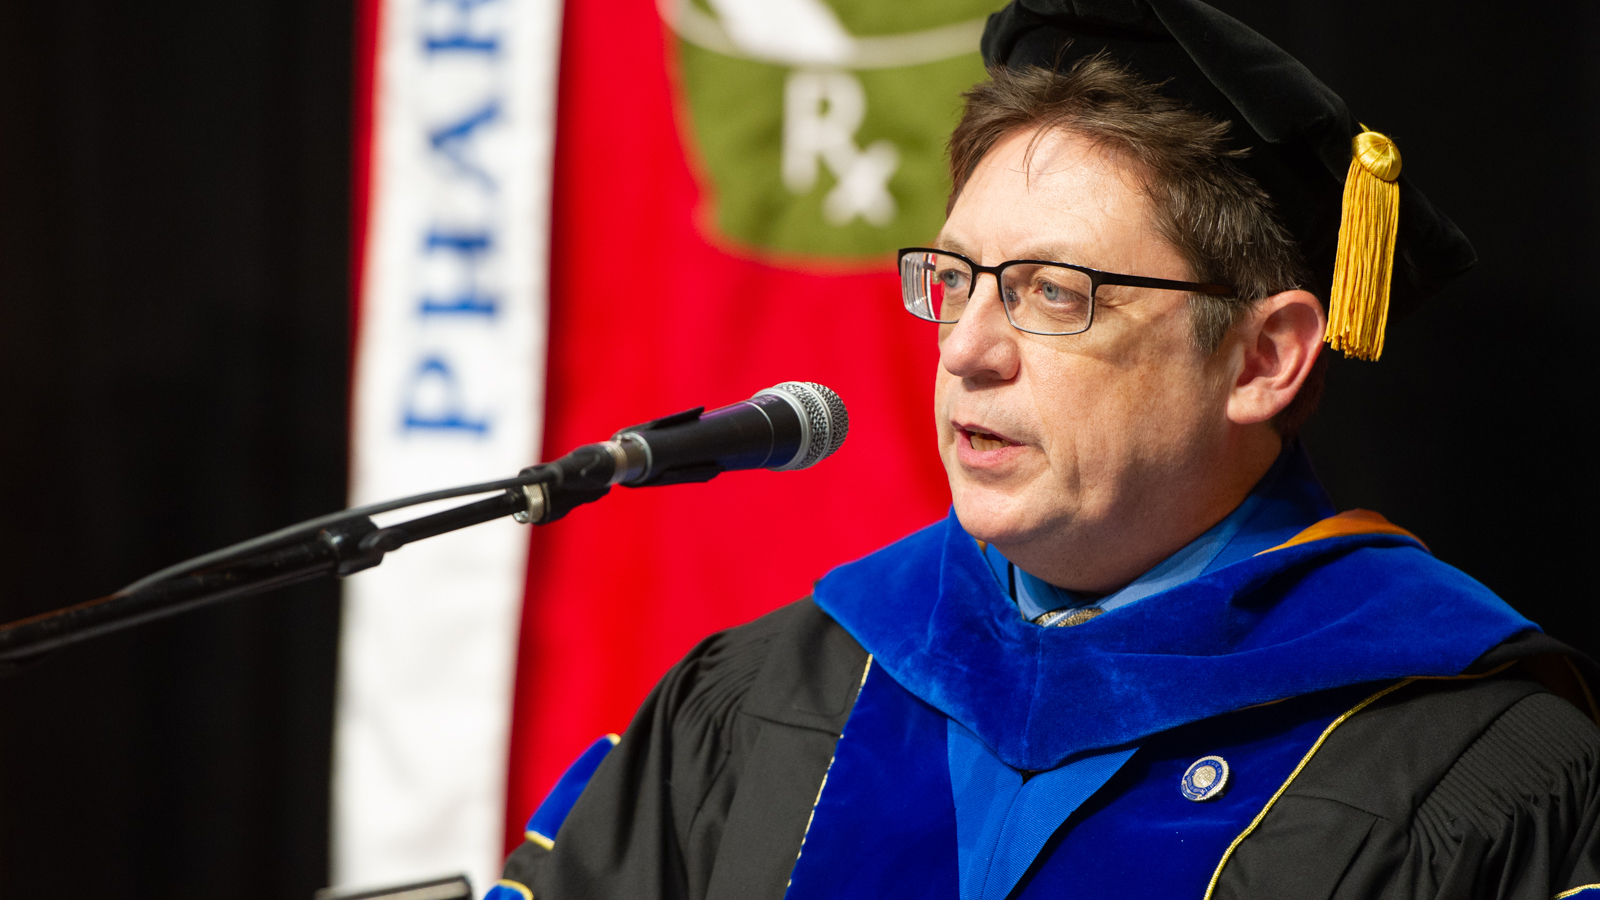 Dean Weinberg from previous ceremony